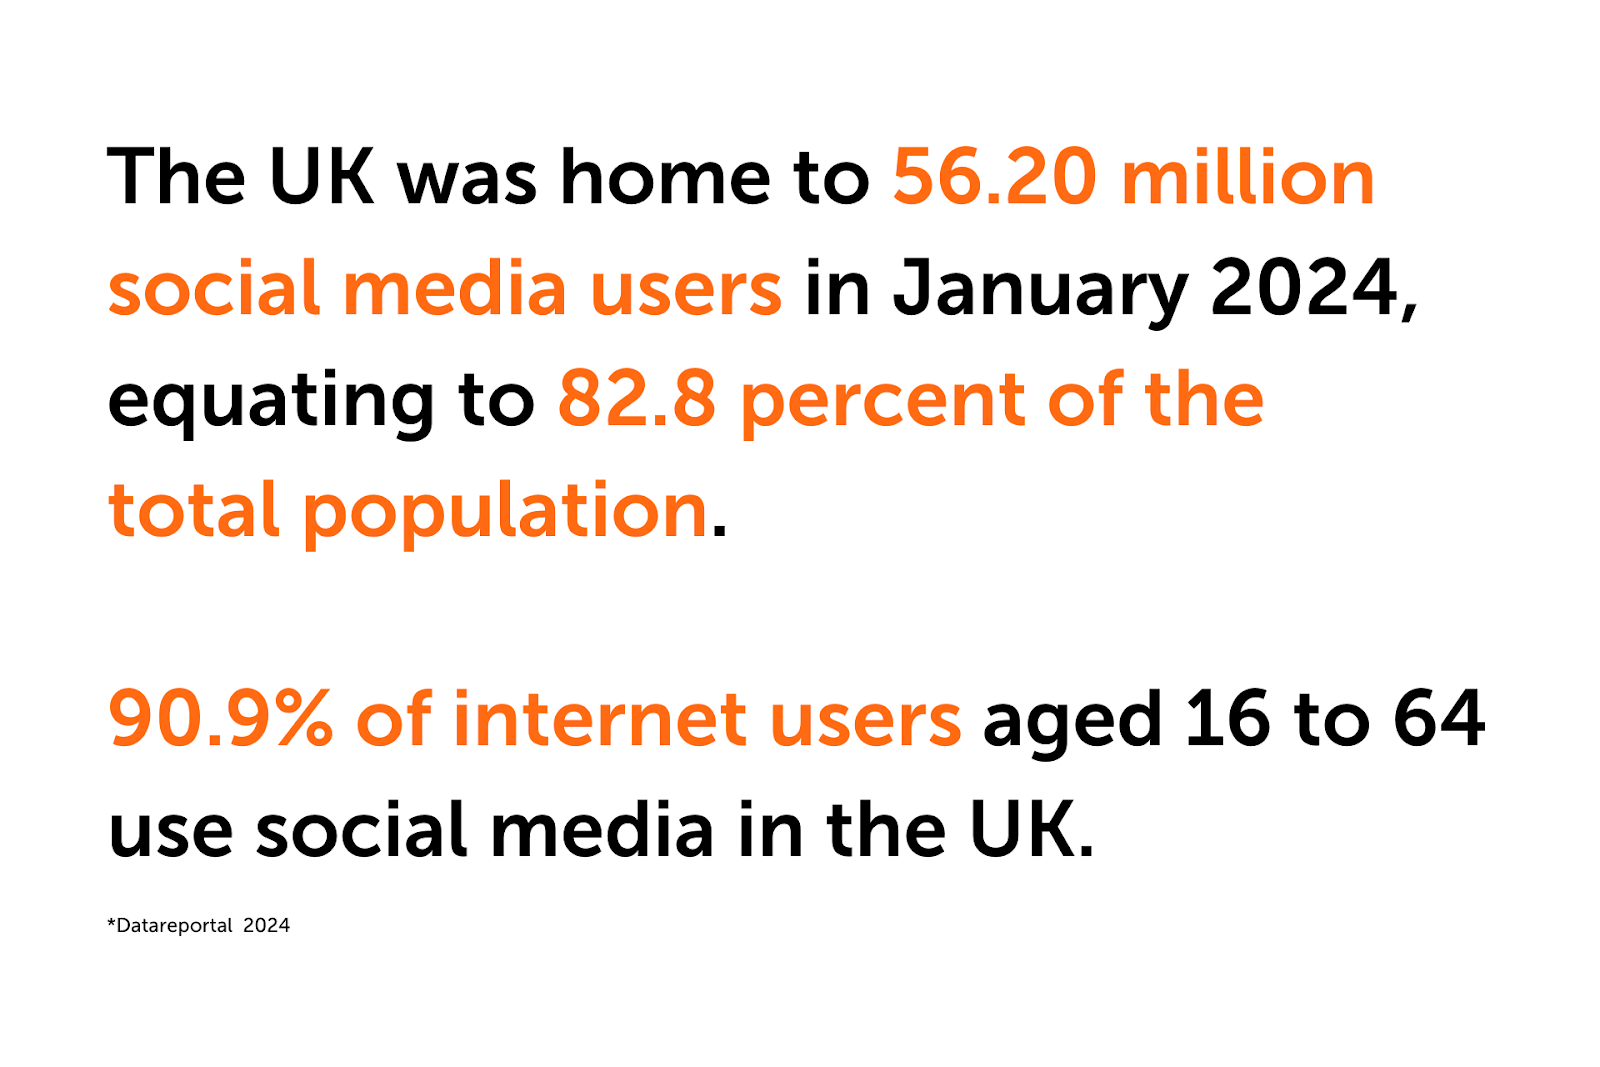 The UK has 56.2m social media users as of January 2024. Courtesy of Datareportal.